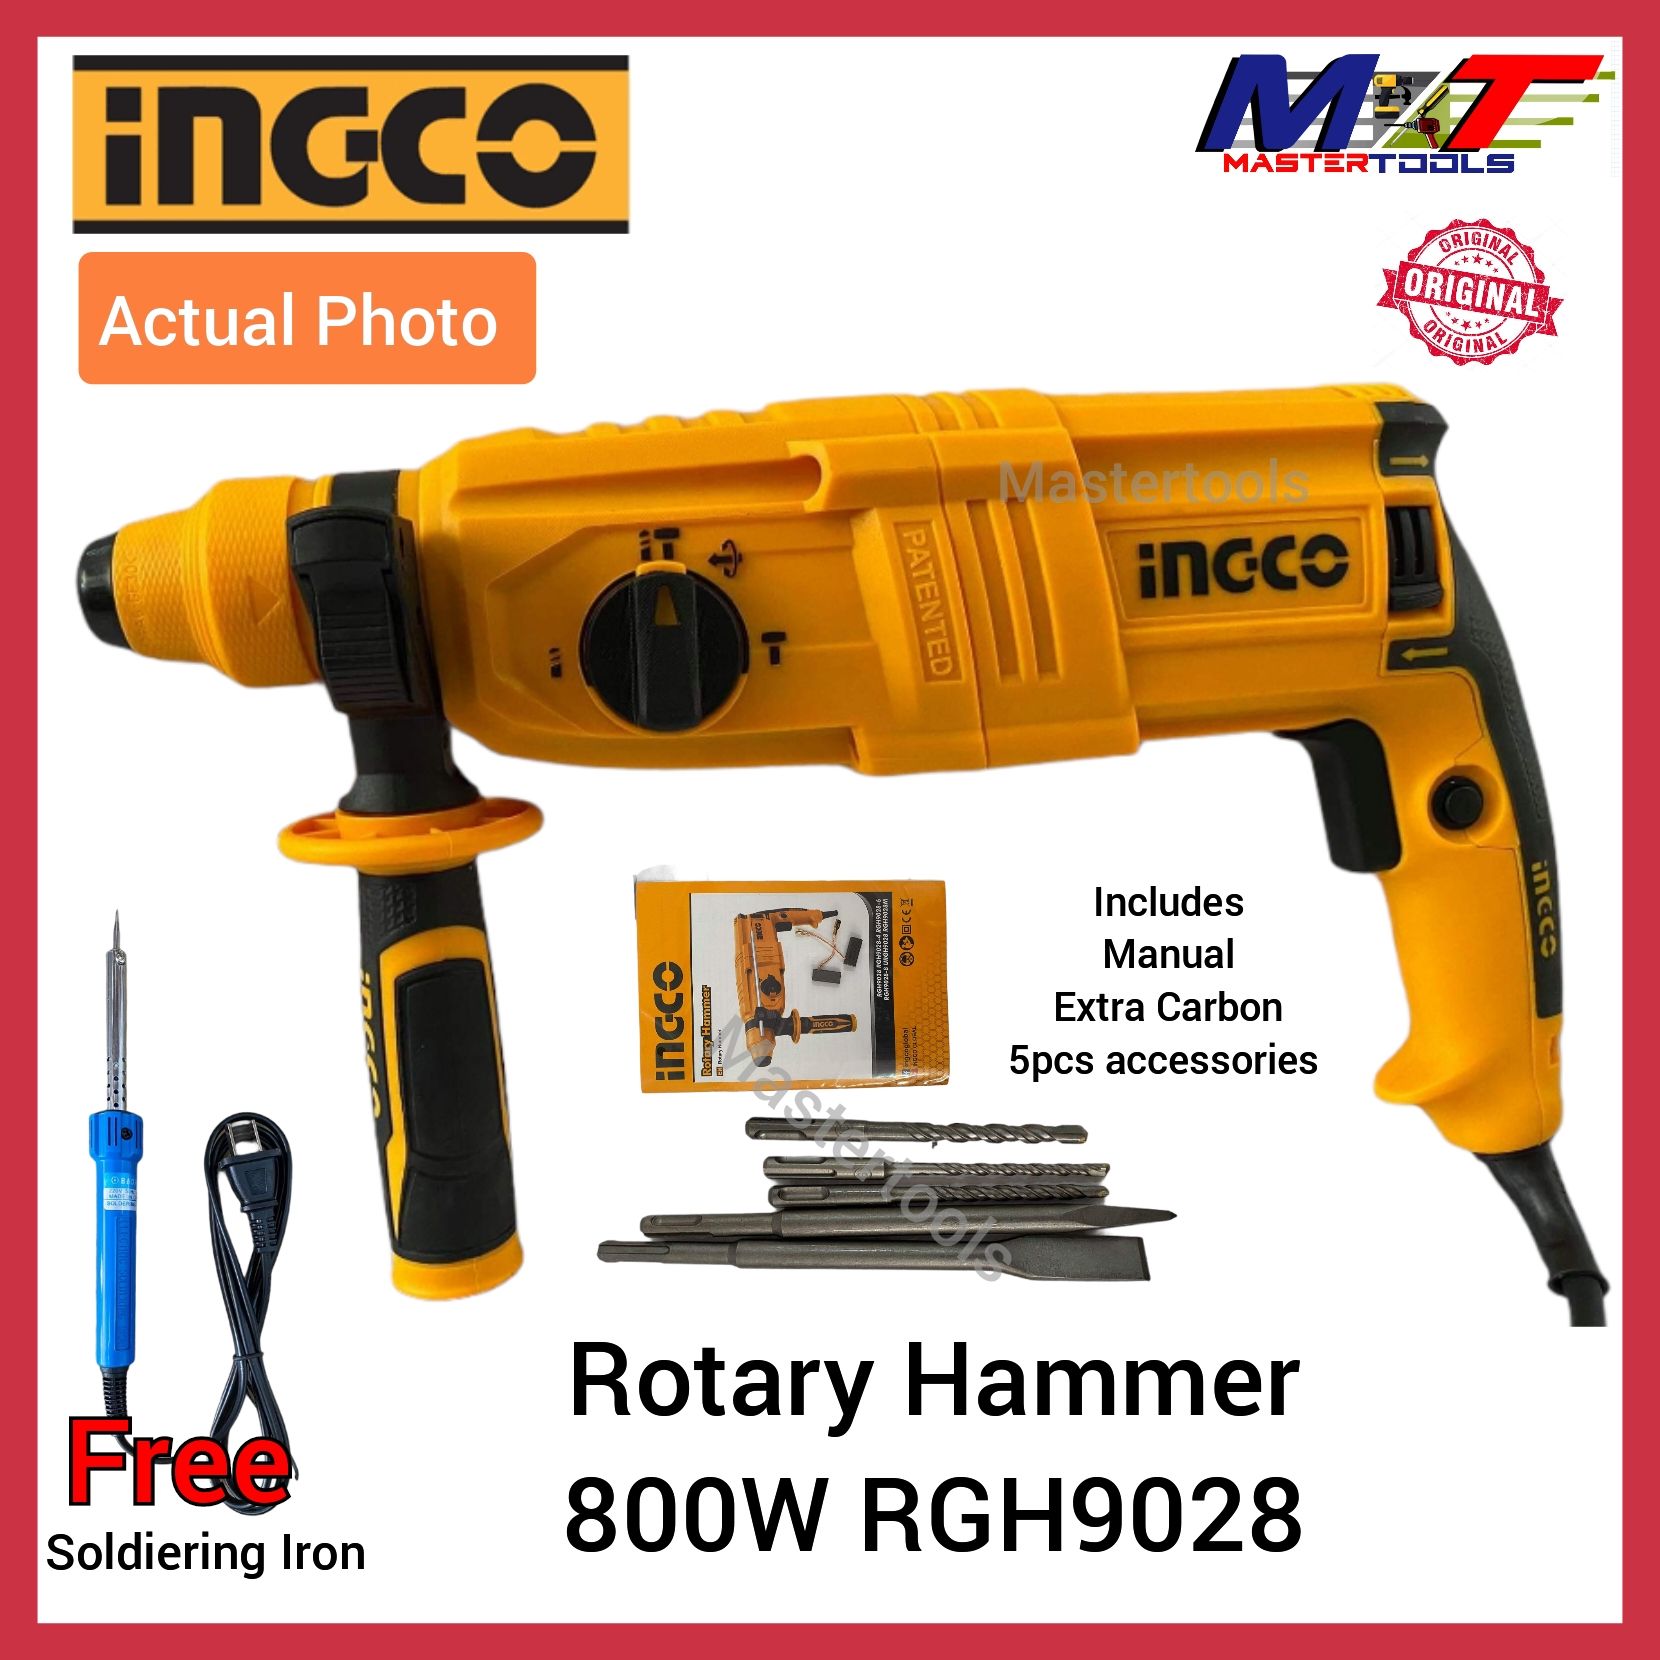 INGCO Rotary Hammer 800W SDS PLUS RGH9028 free soldiering iron | Lazada PH